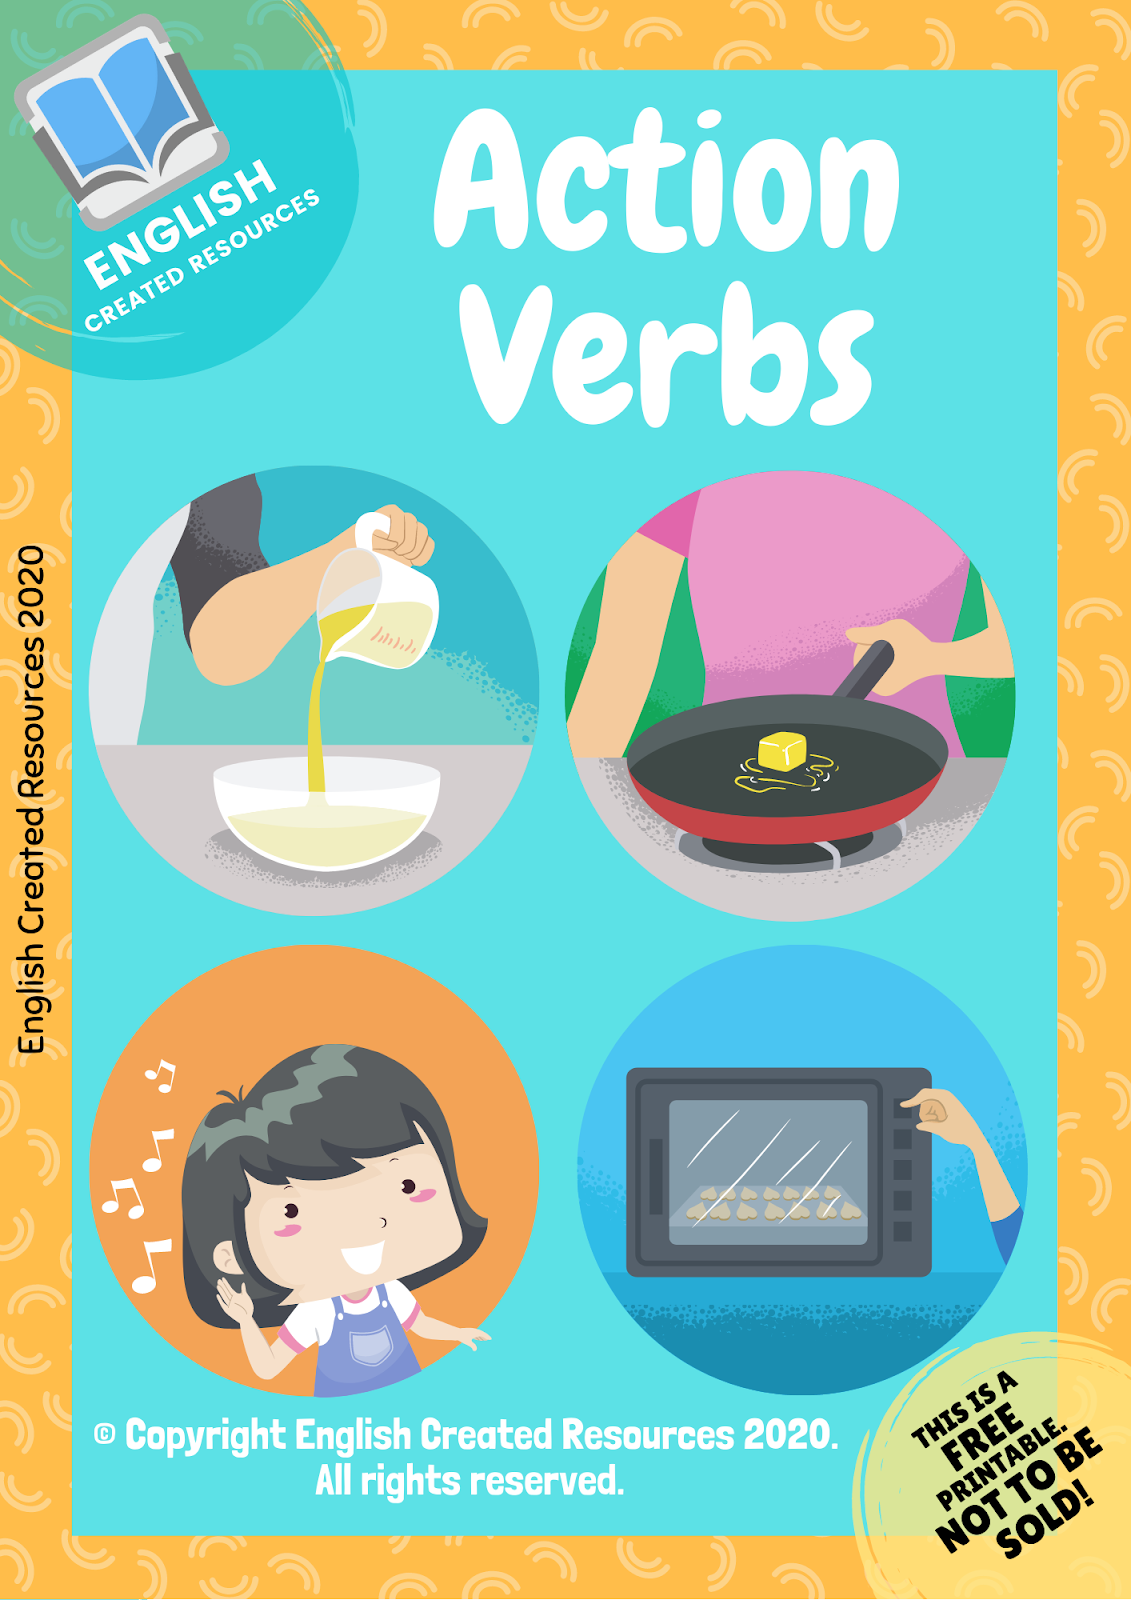 action-verbs-action-verbs-parts-of-body-language-development